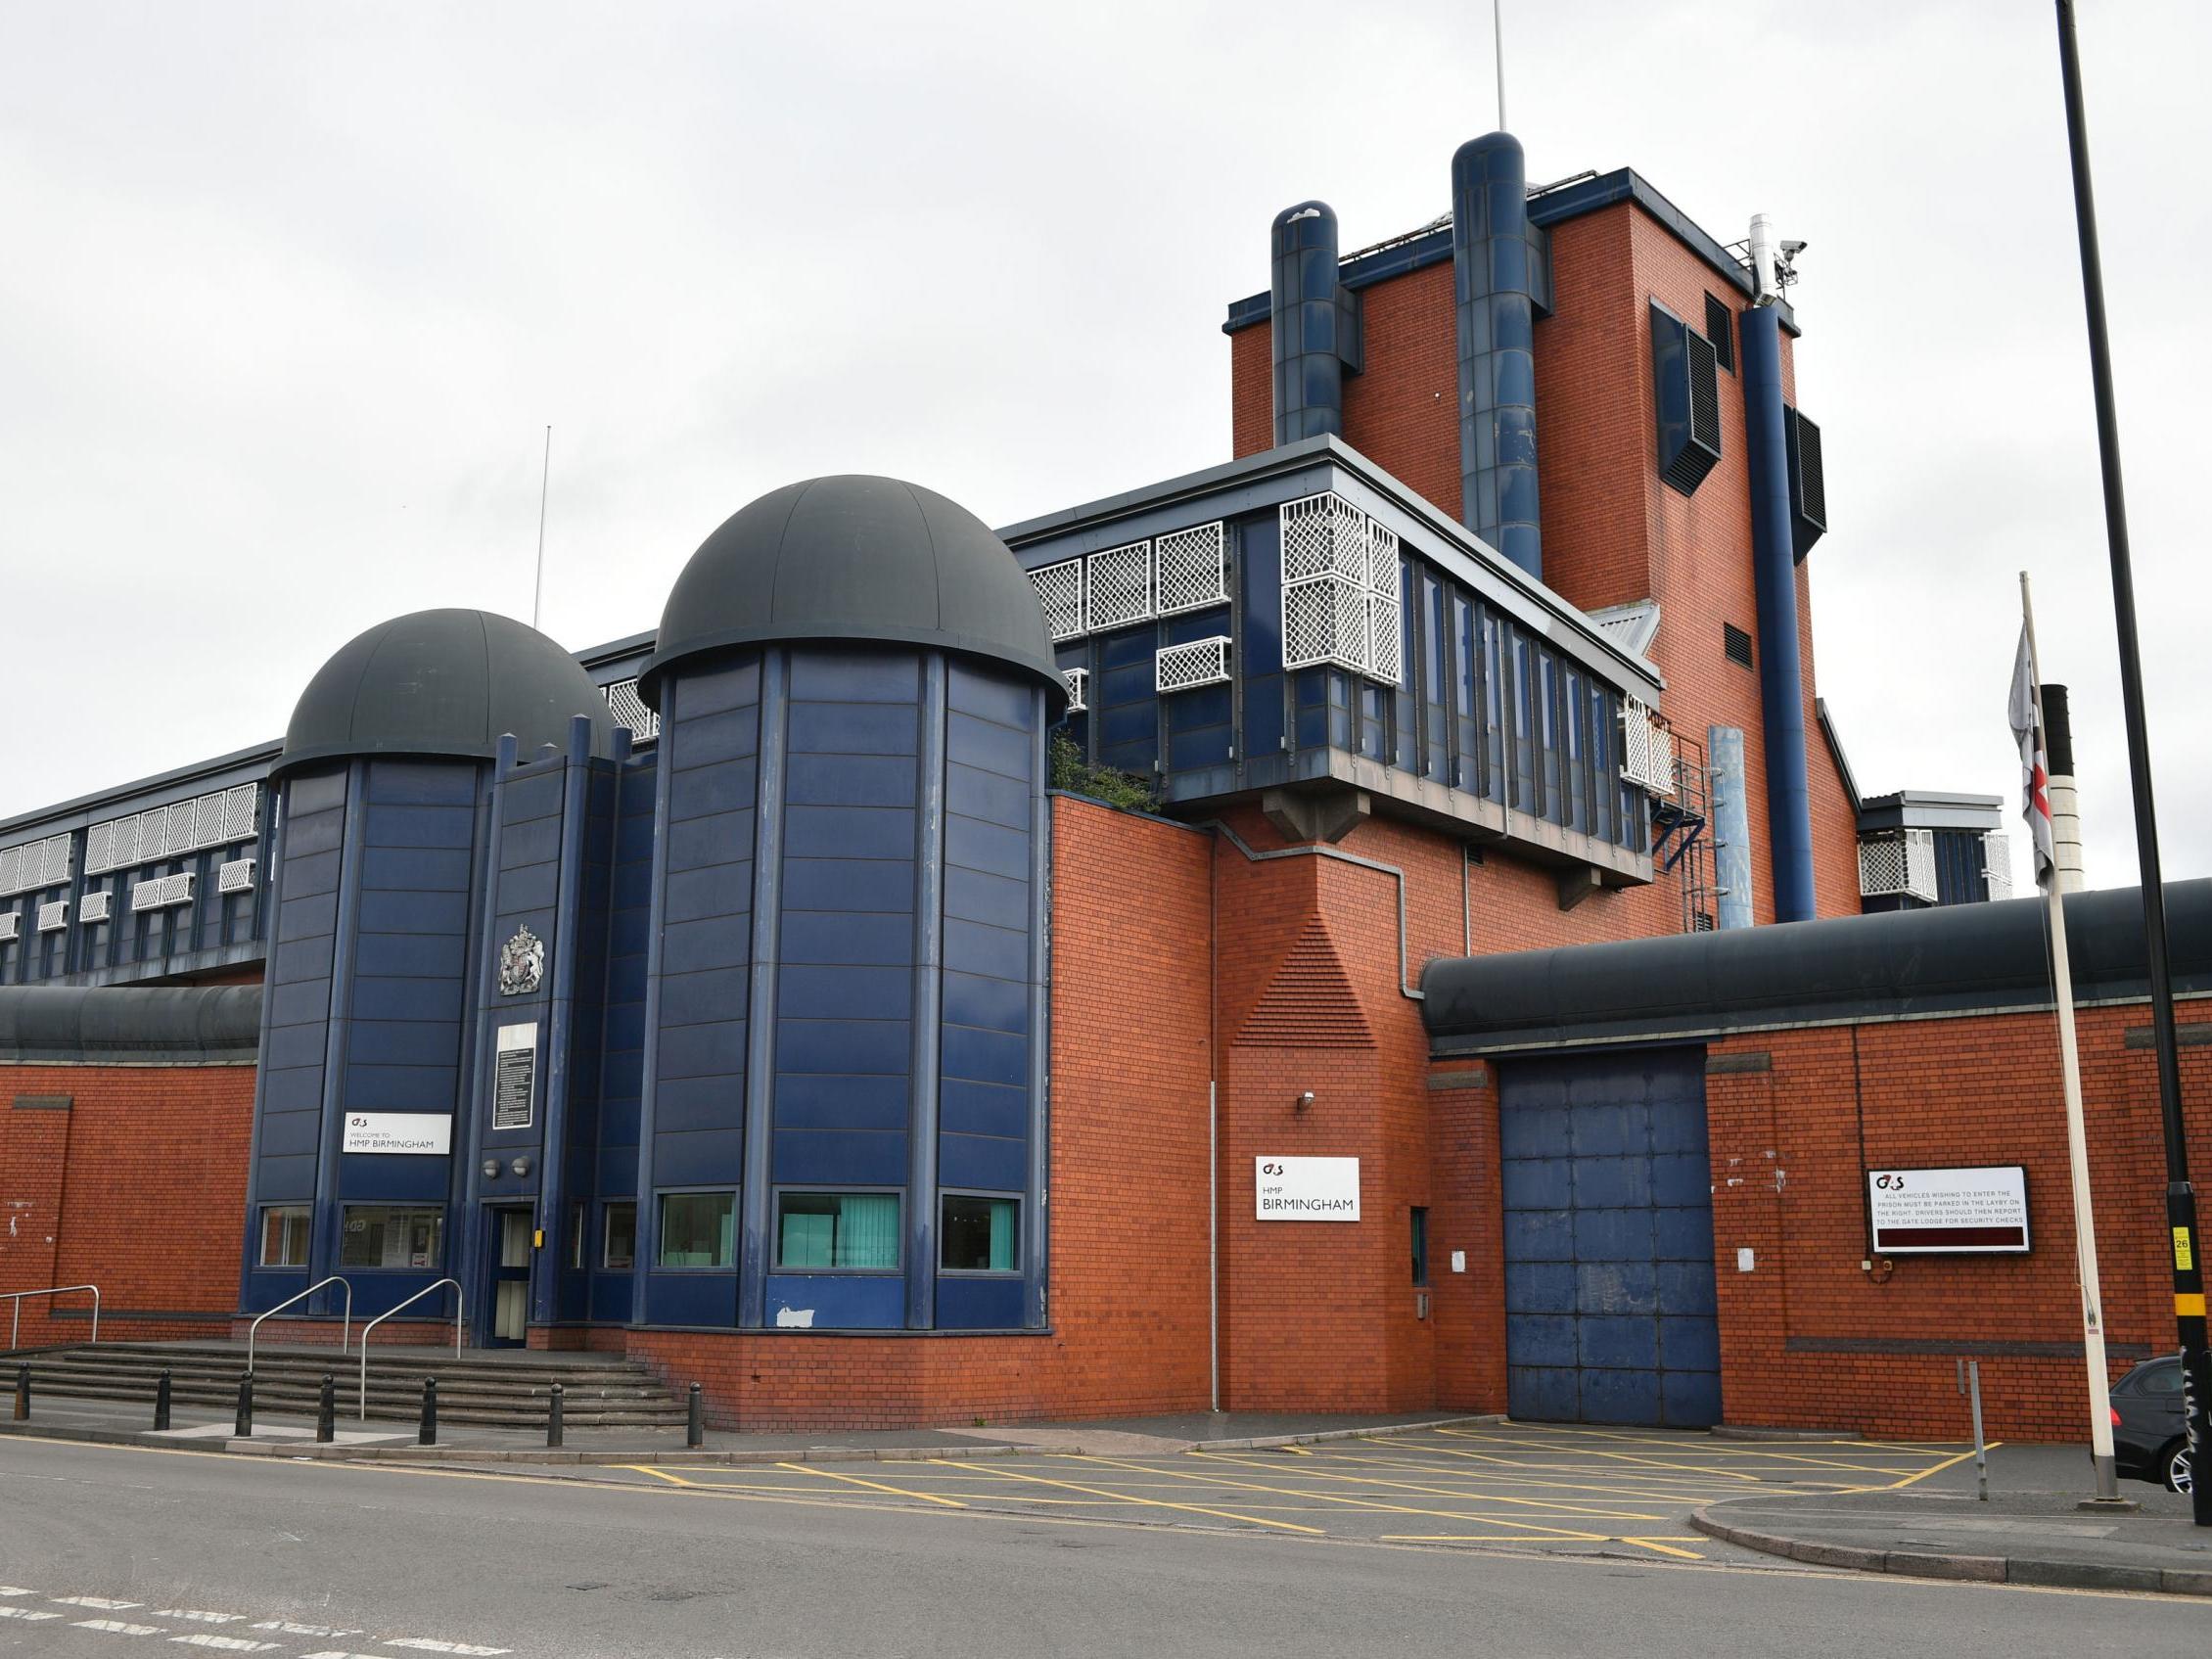 HMP Birmingham, where damning inspection led to G4S being stripped of role